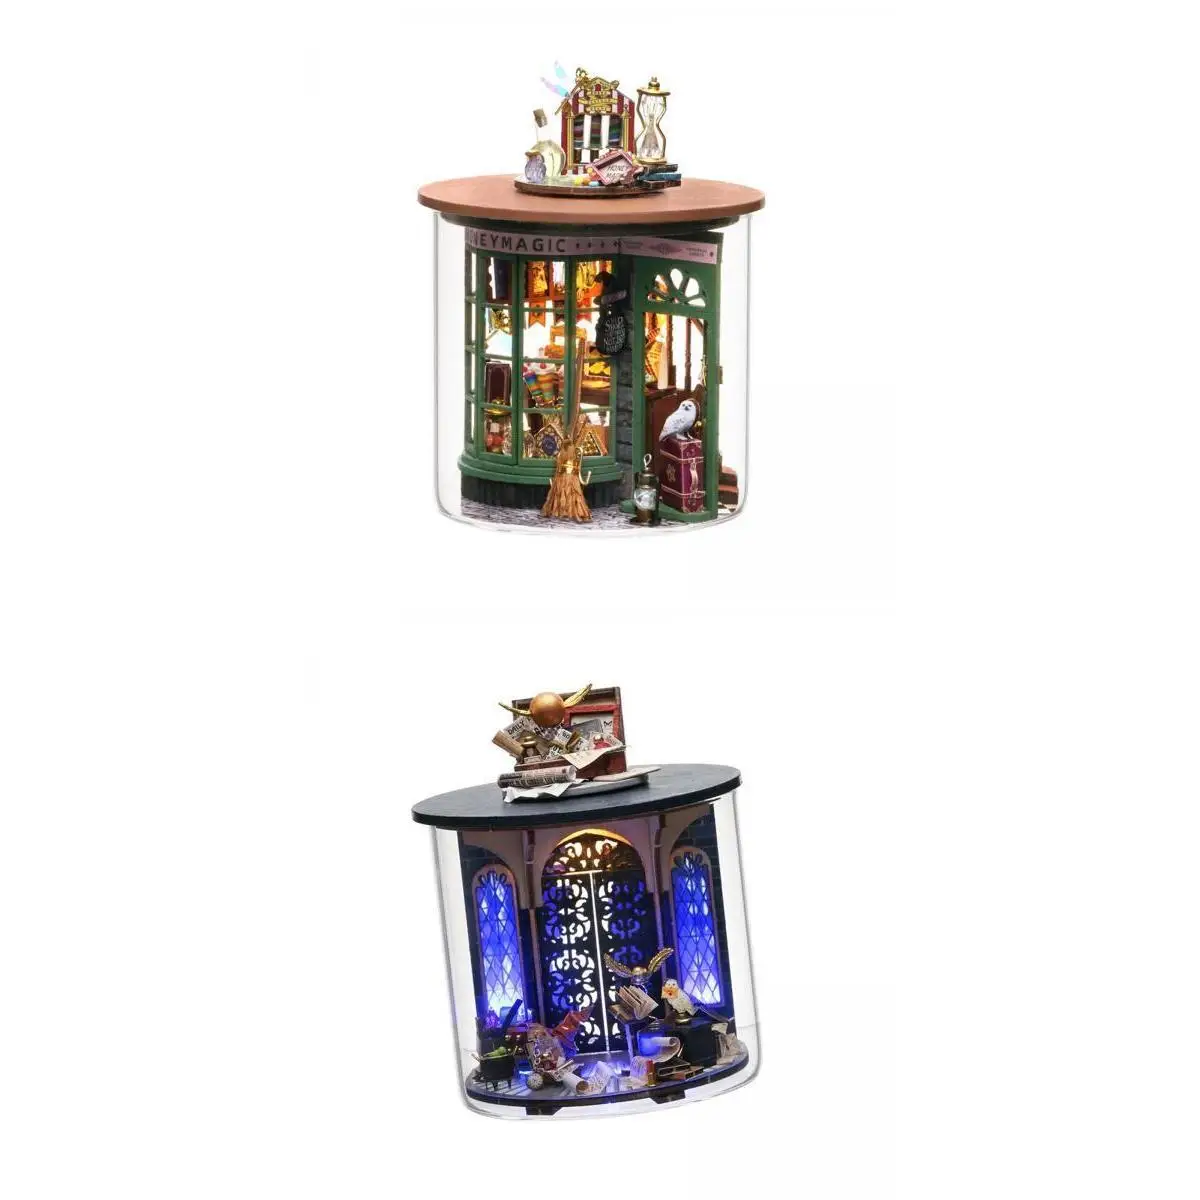 2x DIY Miniature Doll House with Dust Cover Gift Toys for Birthday